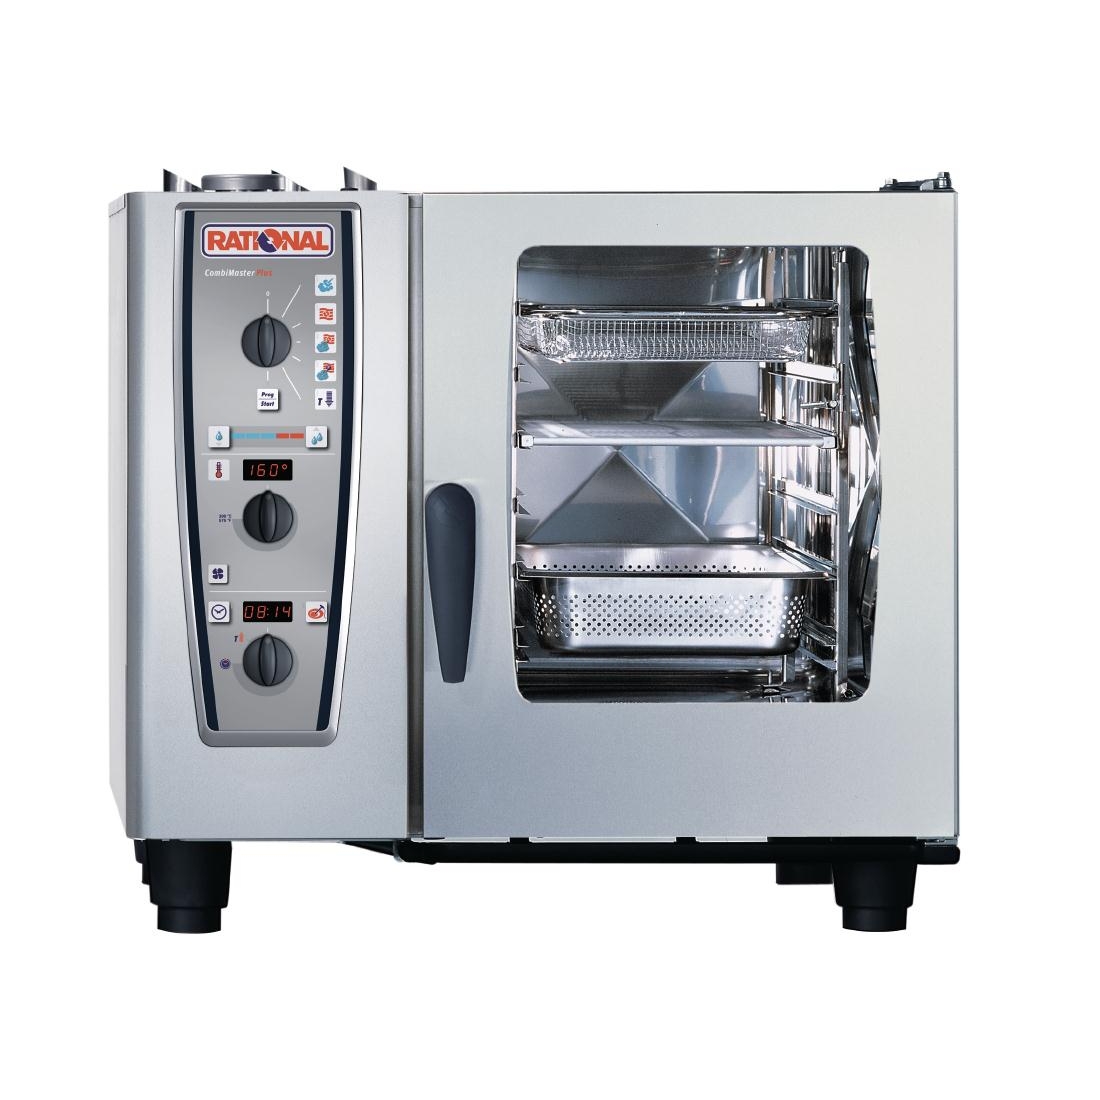 Rational Combimaster Plus Oven 61 Electric